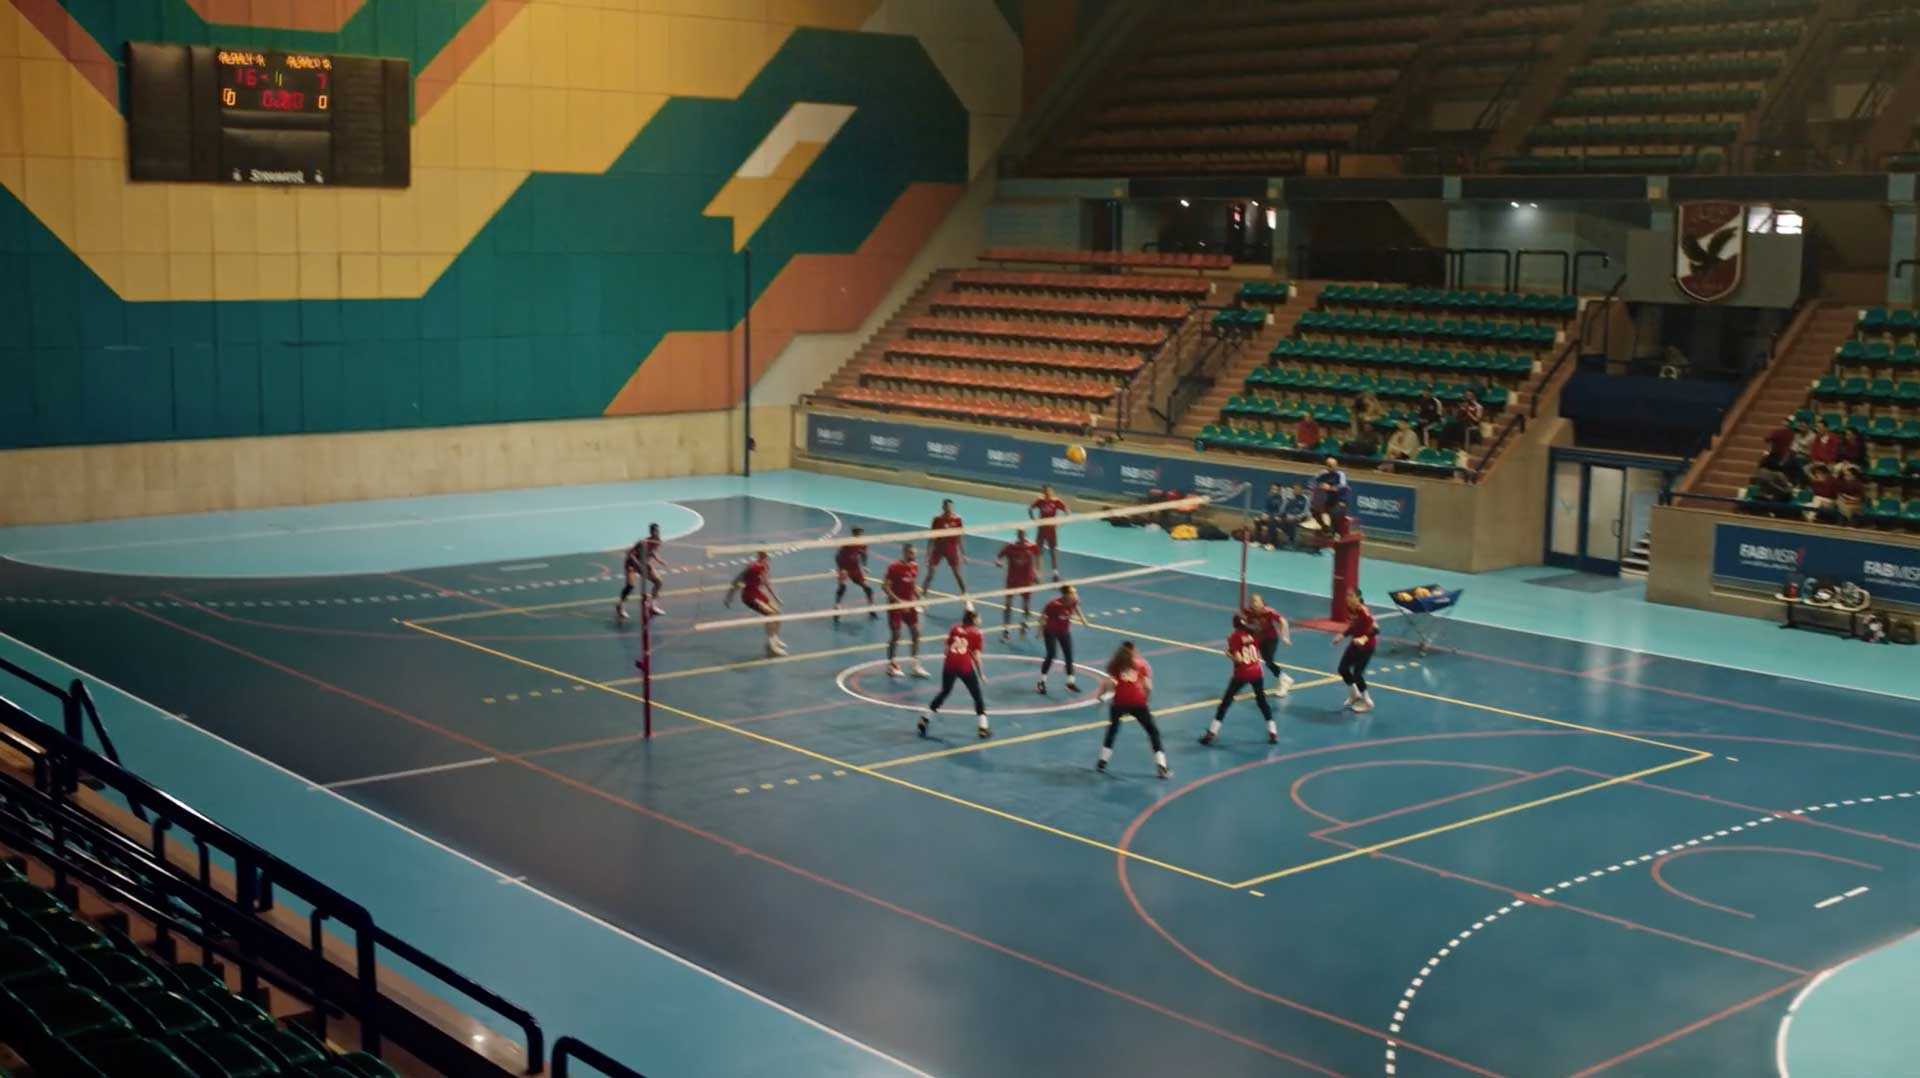 FAB x Ahly Ballers in Every Sport commercial | STASH MAGAZINE